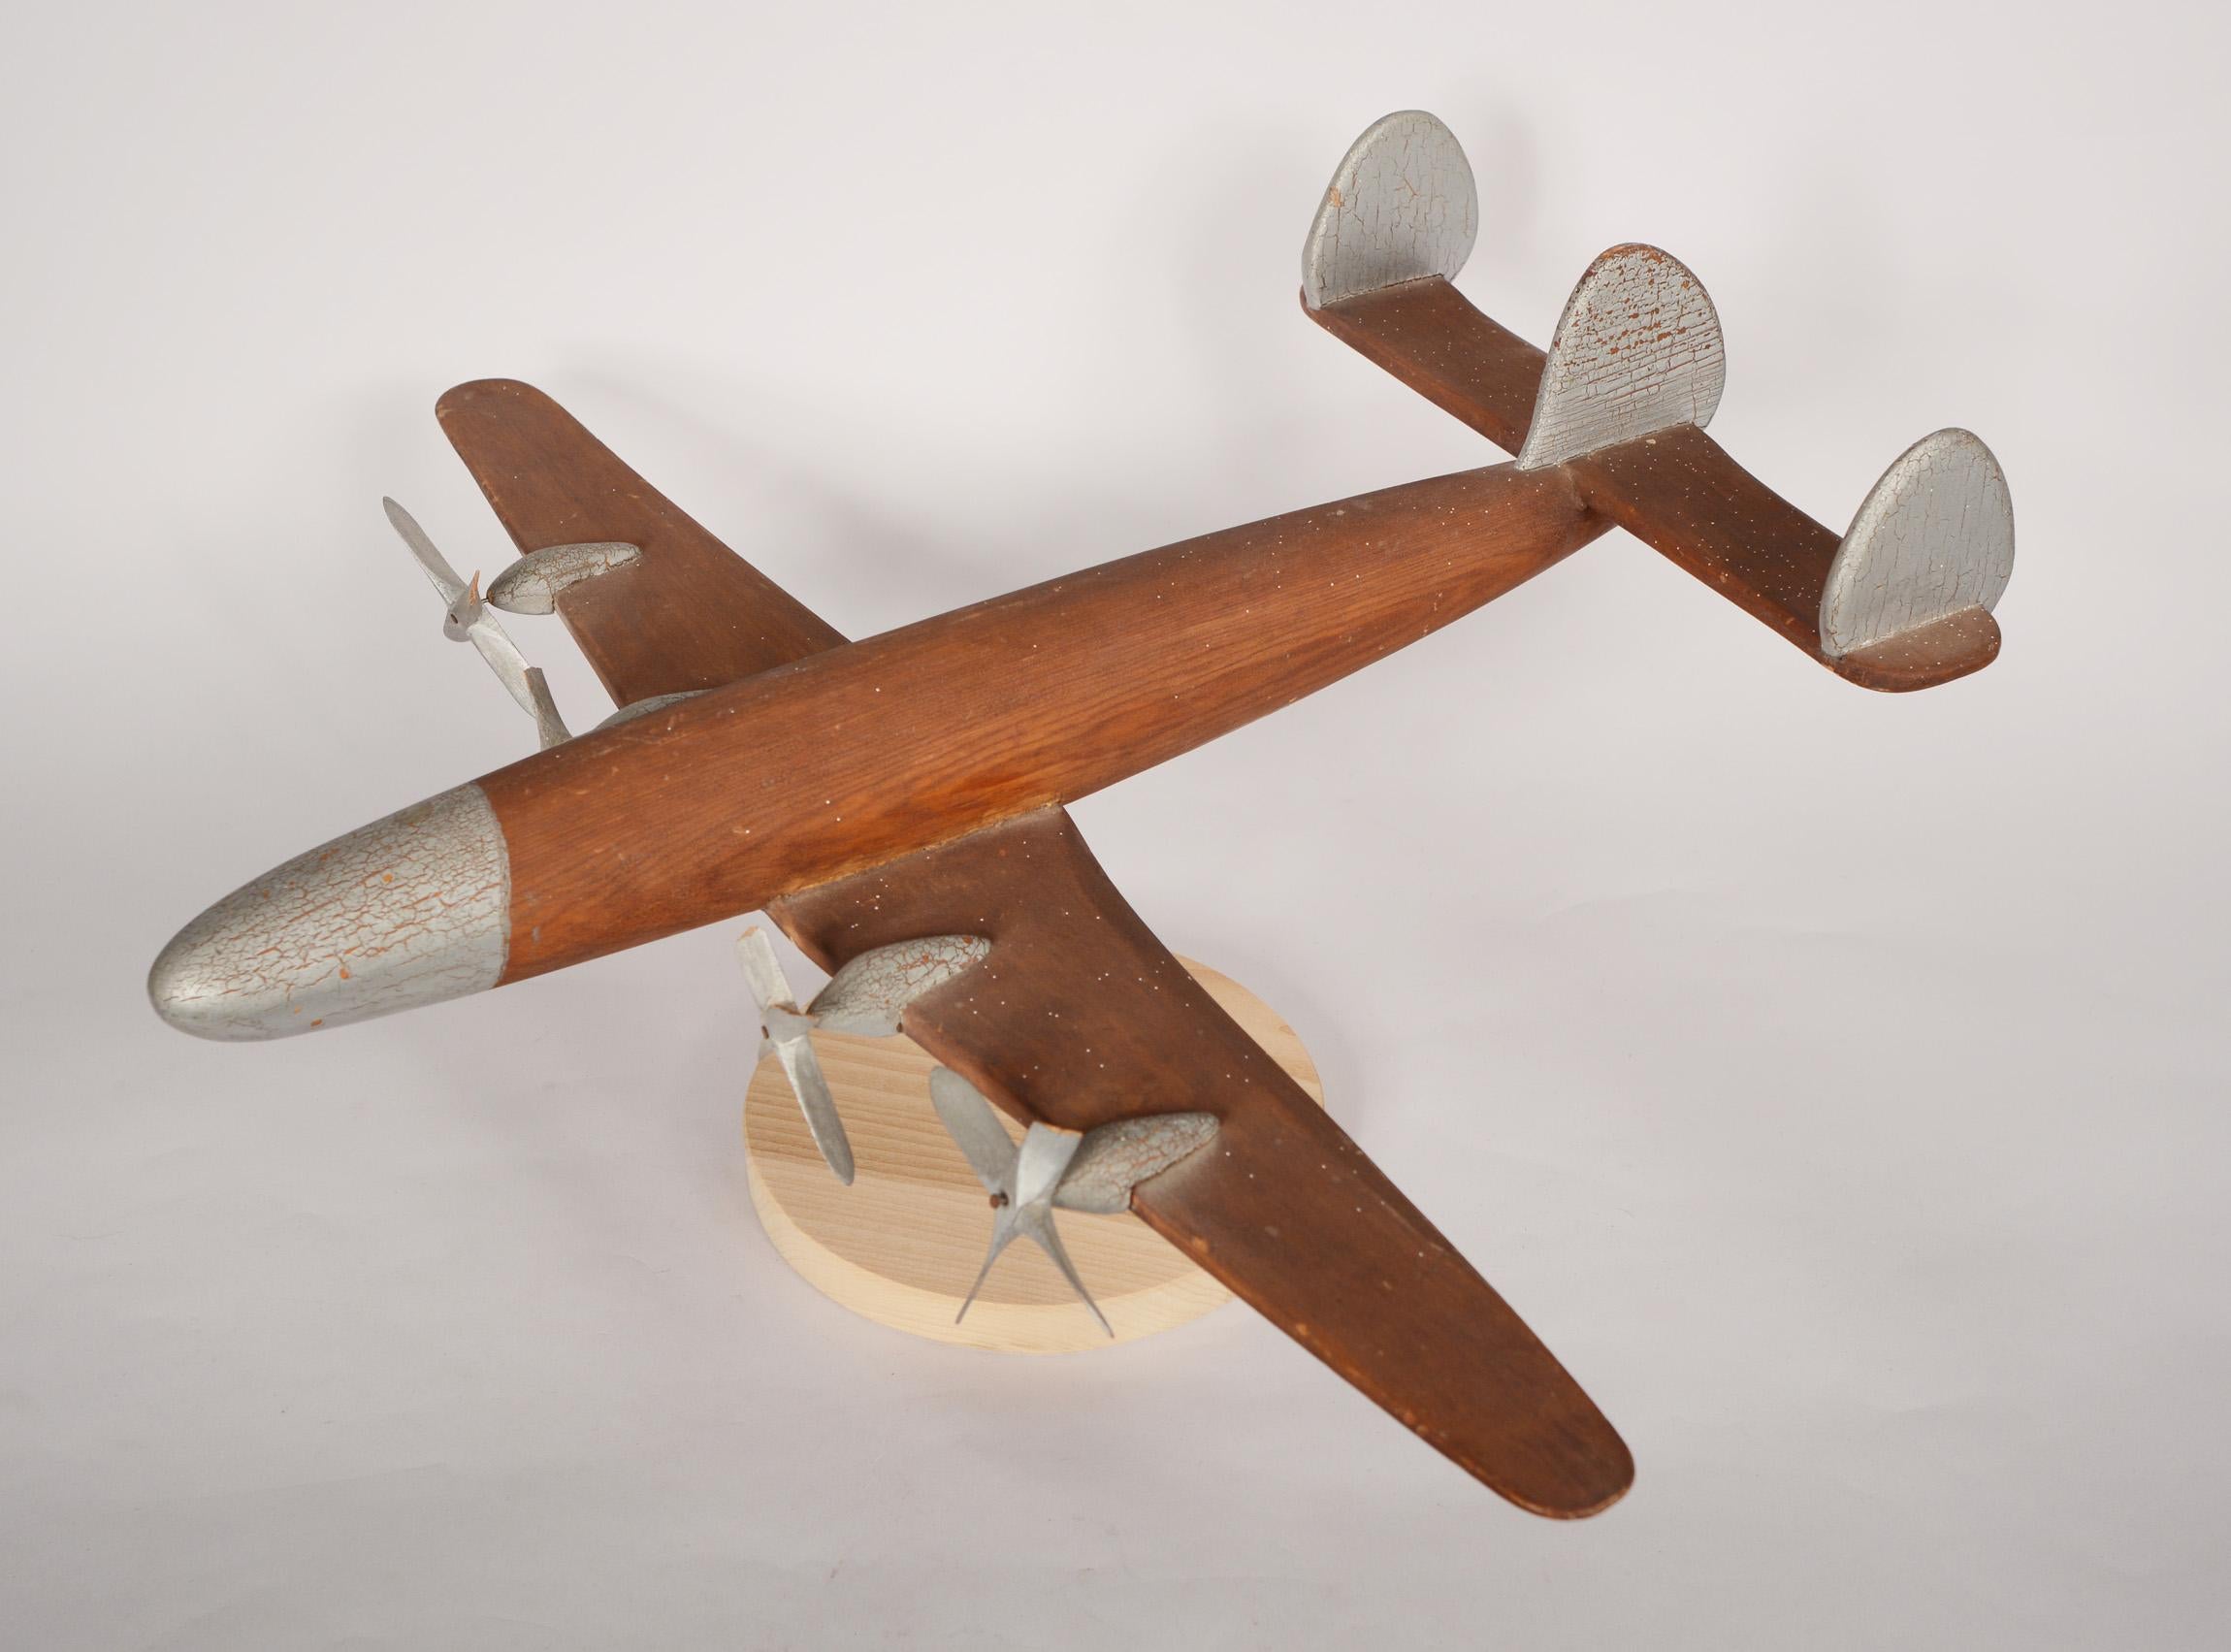 Large model of a Lockheed Constellation made by Charles Long. The airplane is made of redwood. The propellers are pine. Charles was a captain in the Army Air Corps and I believe later worked for Lockheed. There are some broken propeller blades and